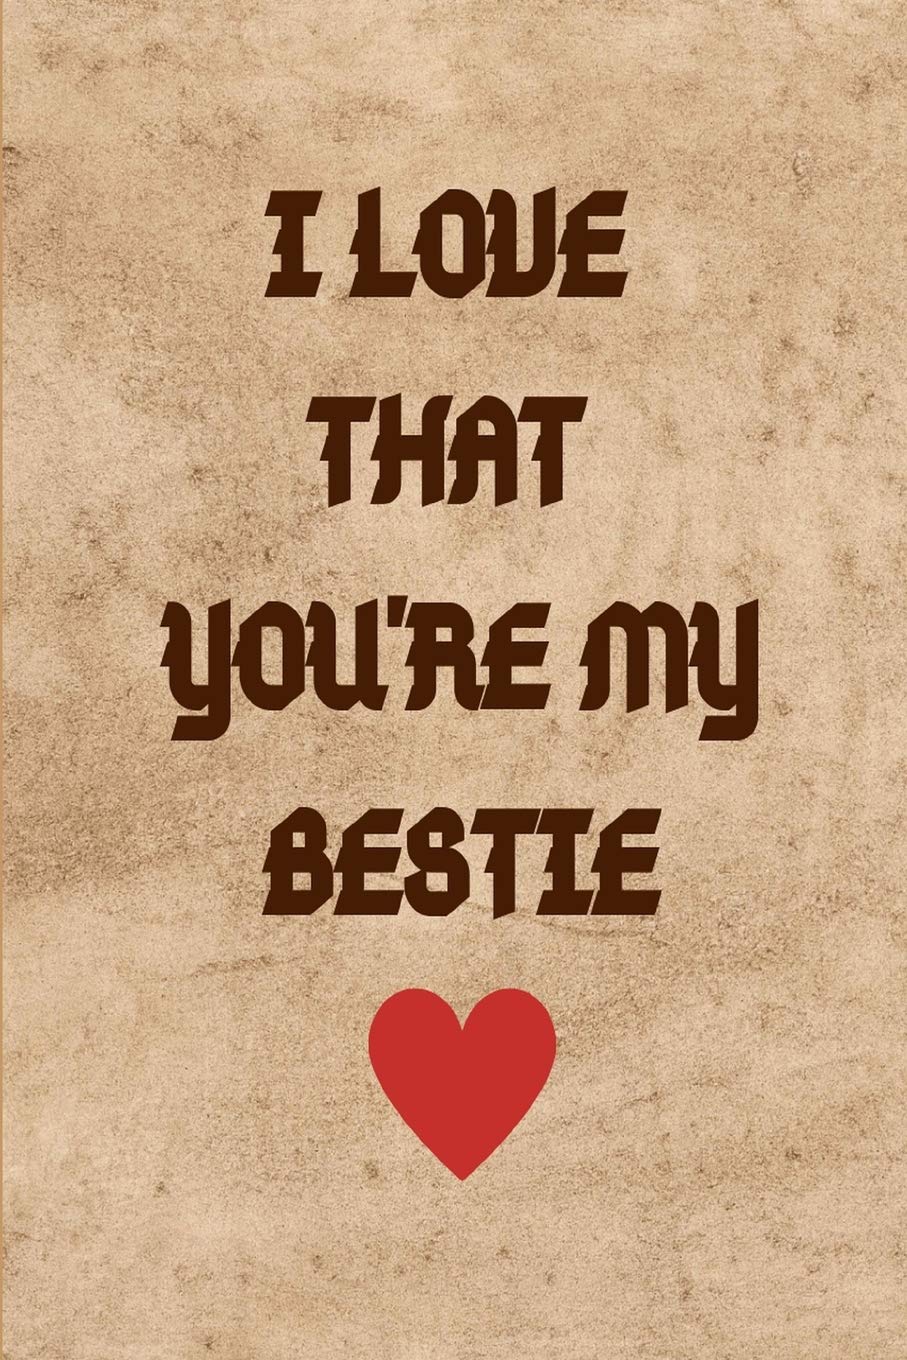 I Love That You're My Bestie: Lined Notebook Book Gift with Inspirational Grateful Thankful Quote for Besties (Best Friend) (Love and Appreciation Notebooks): Accessories, Applepie & Pickles: 9781699555958: Books